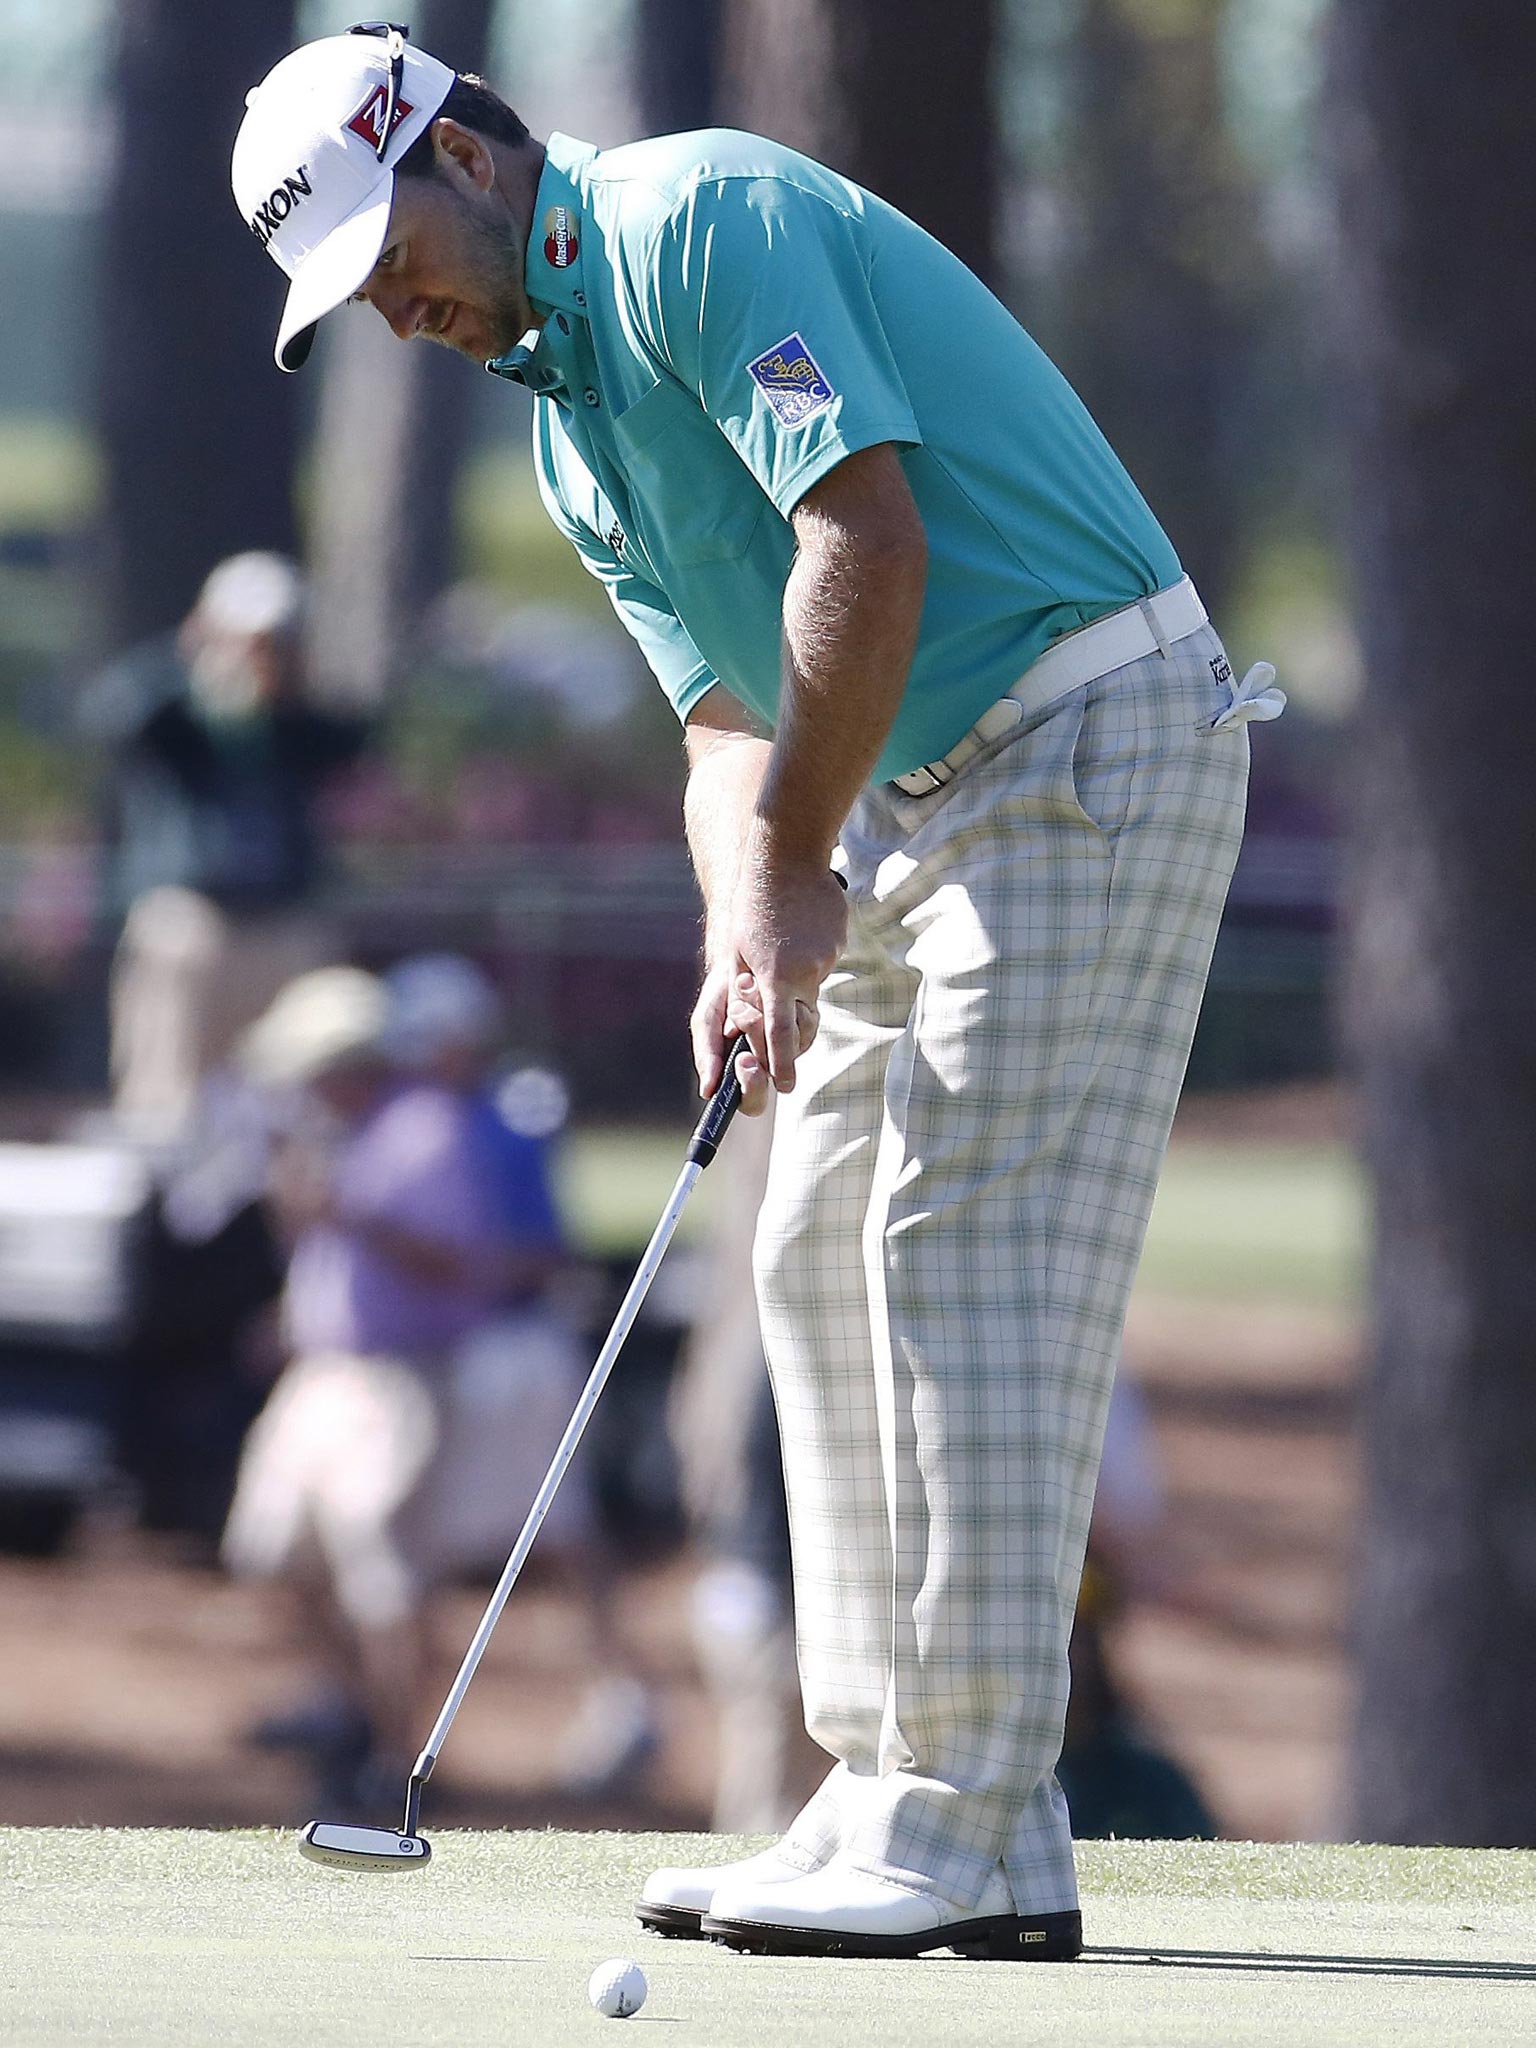 Graeme McDowell is the best putter on the PGA Tour this season
but even he struggled on the fast greens yesterday